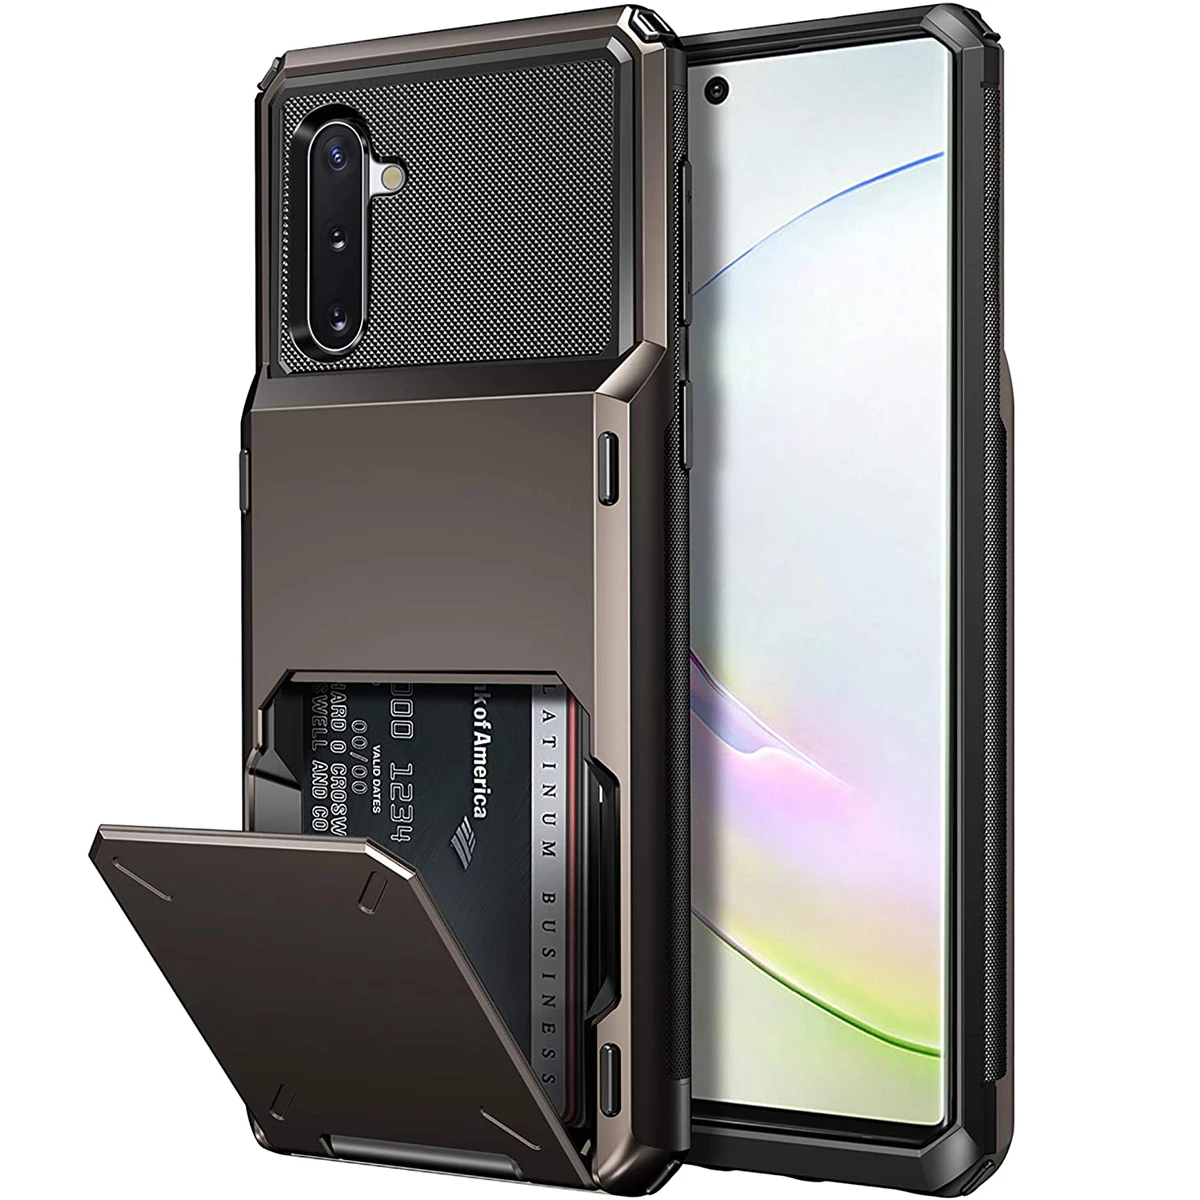 

Armor Slide Wallet Card Slots Holder Case For Samsung Galaxy S21 S20 Ultra S20 FE Note 20 Ultra 9 10Pro S8S9 S10 Plus S10E Cover